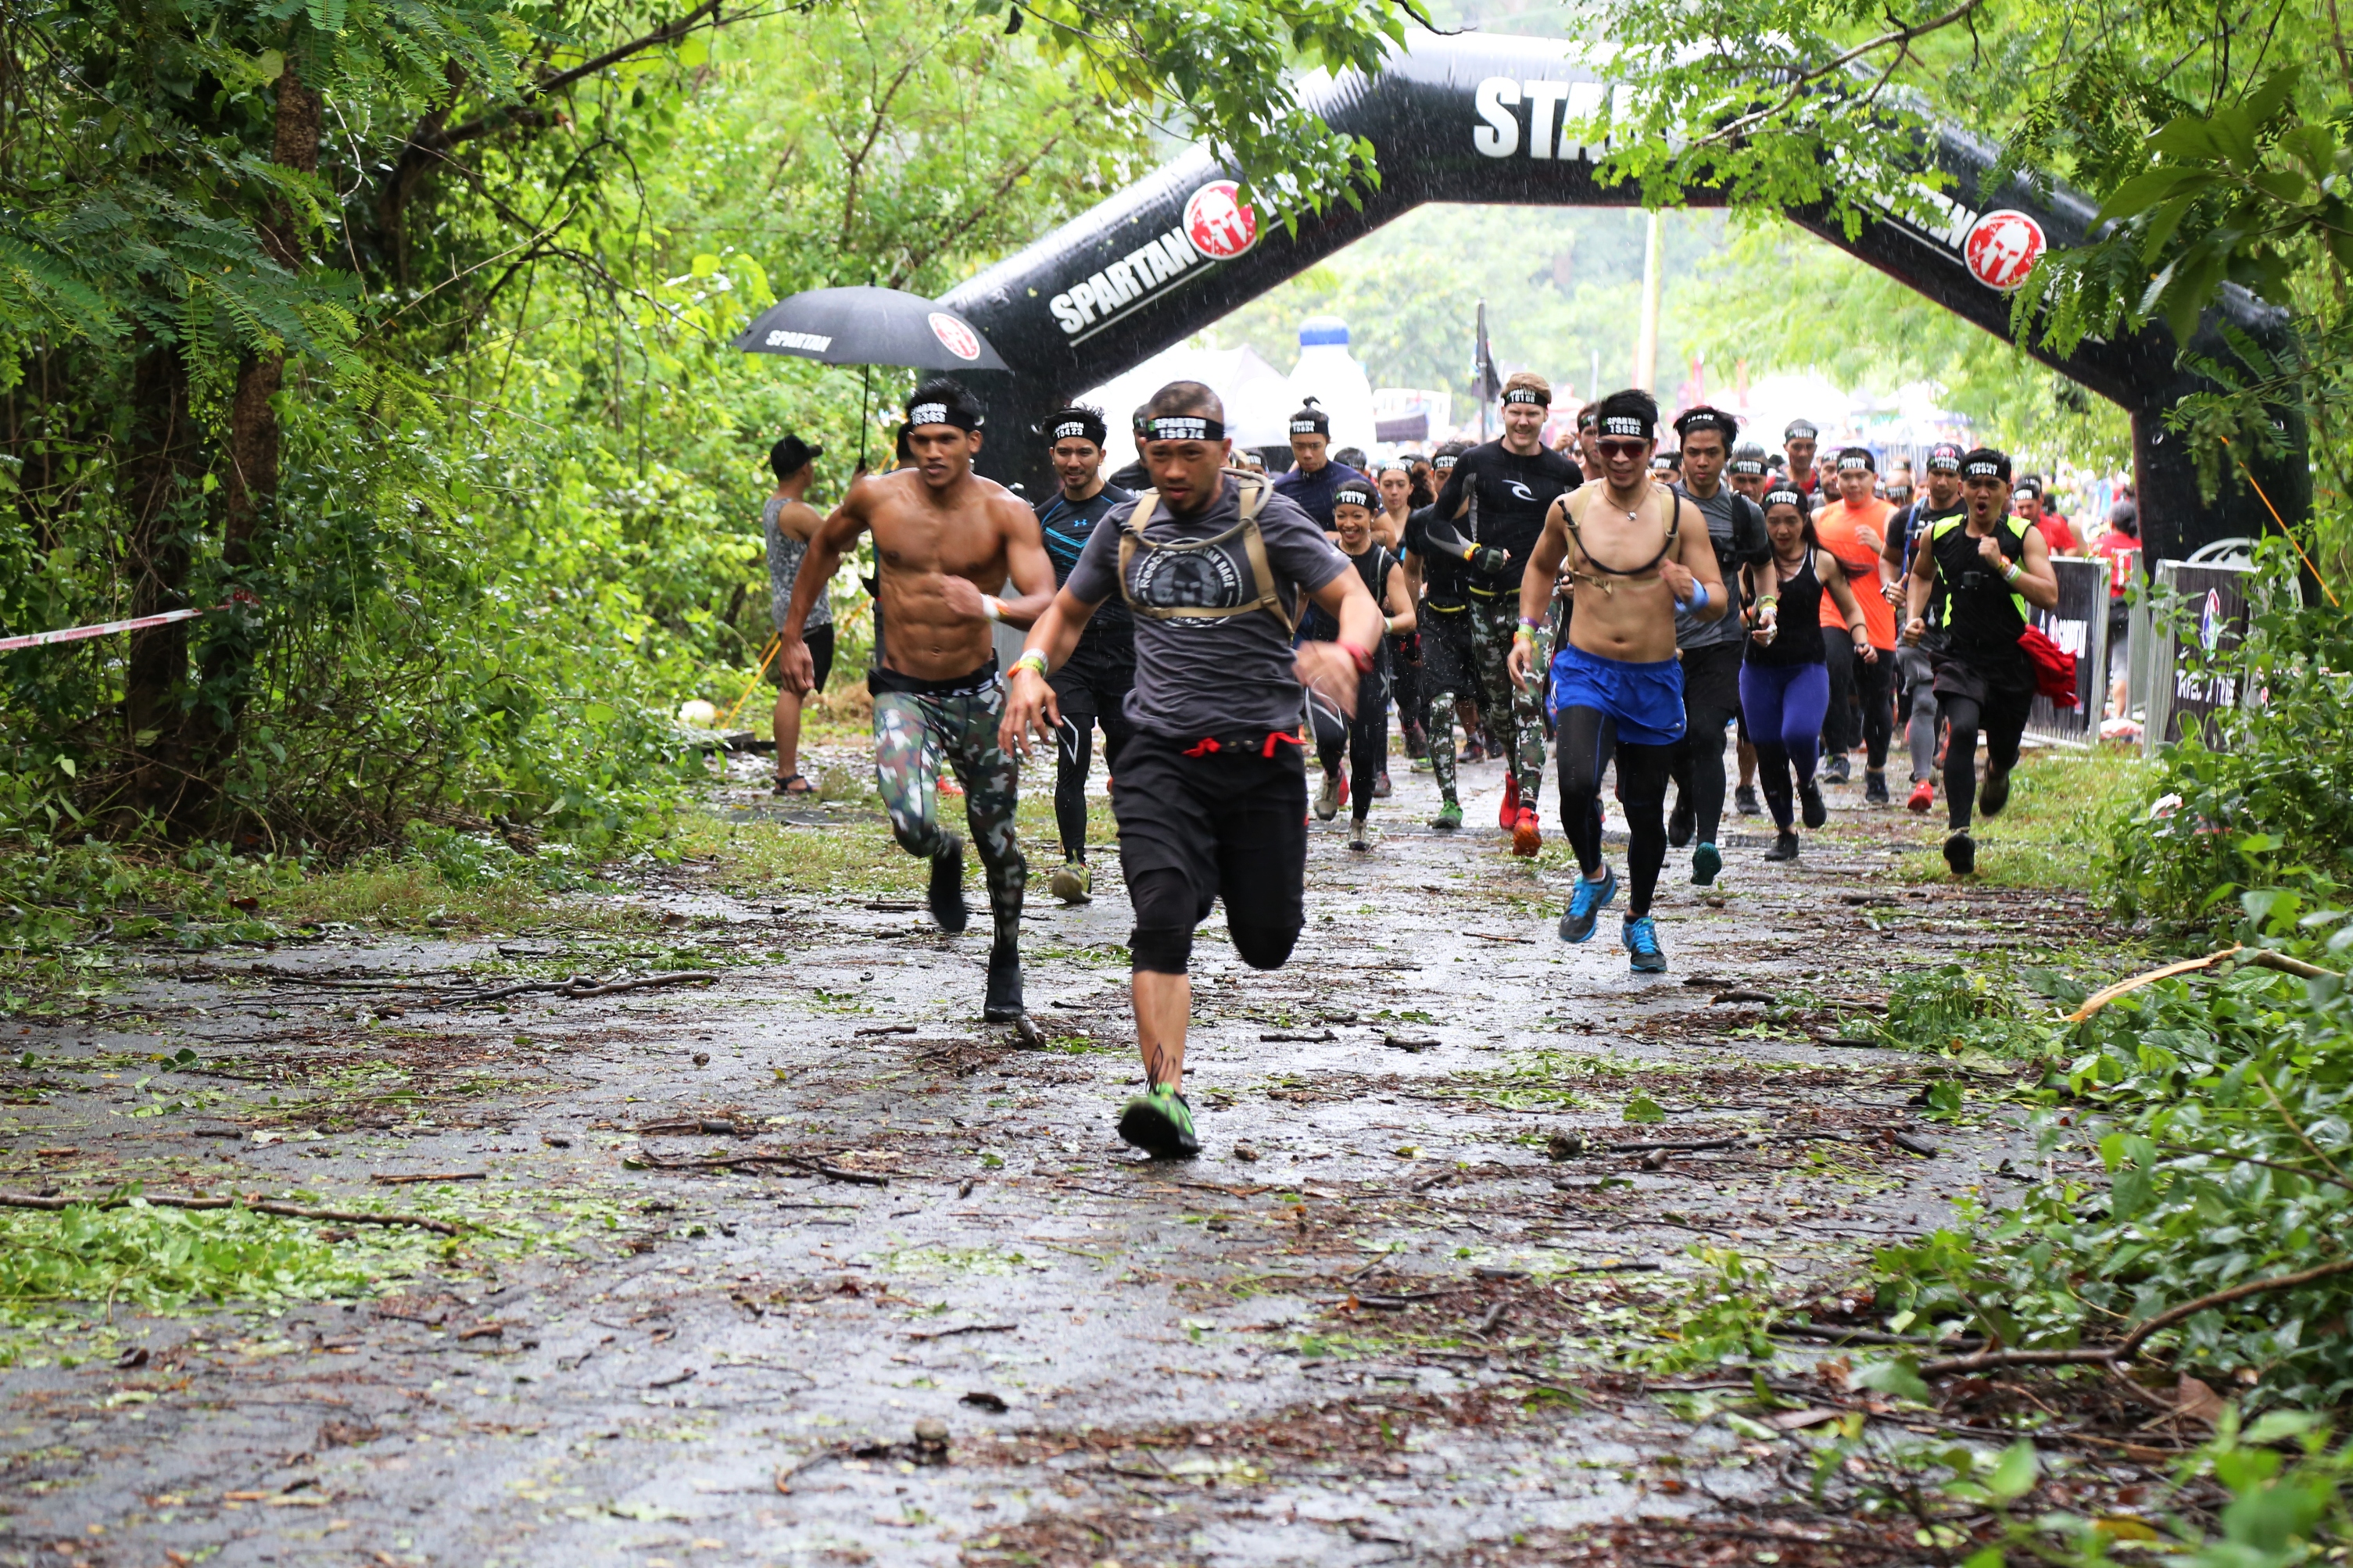 Spartans begin the race deep in the Ilanin Forest of the Subic Bay Freeport